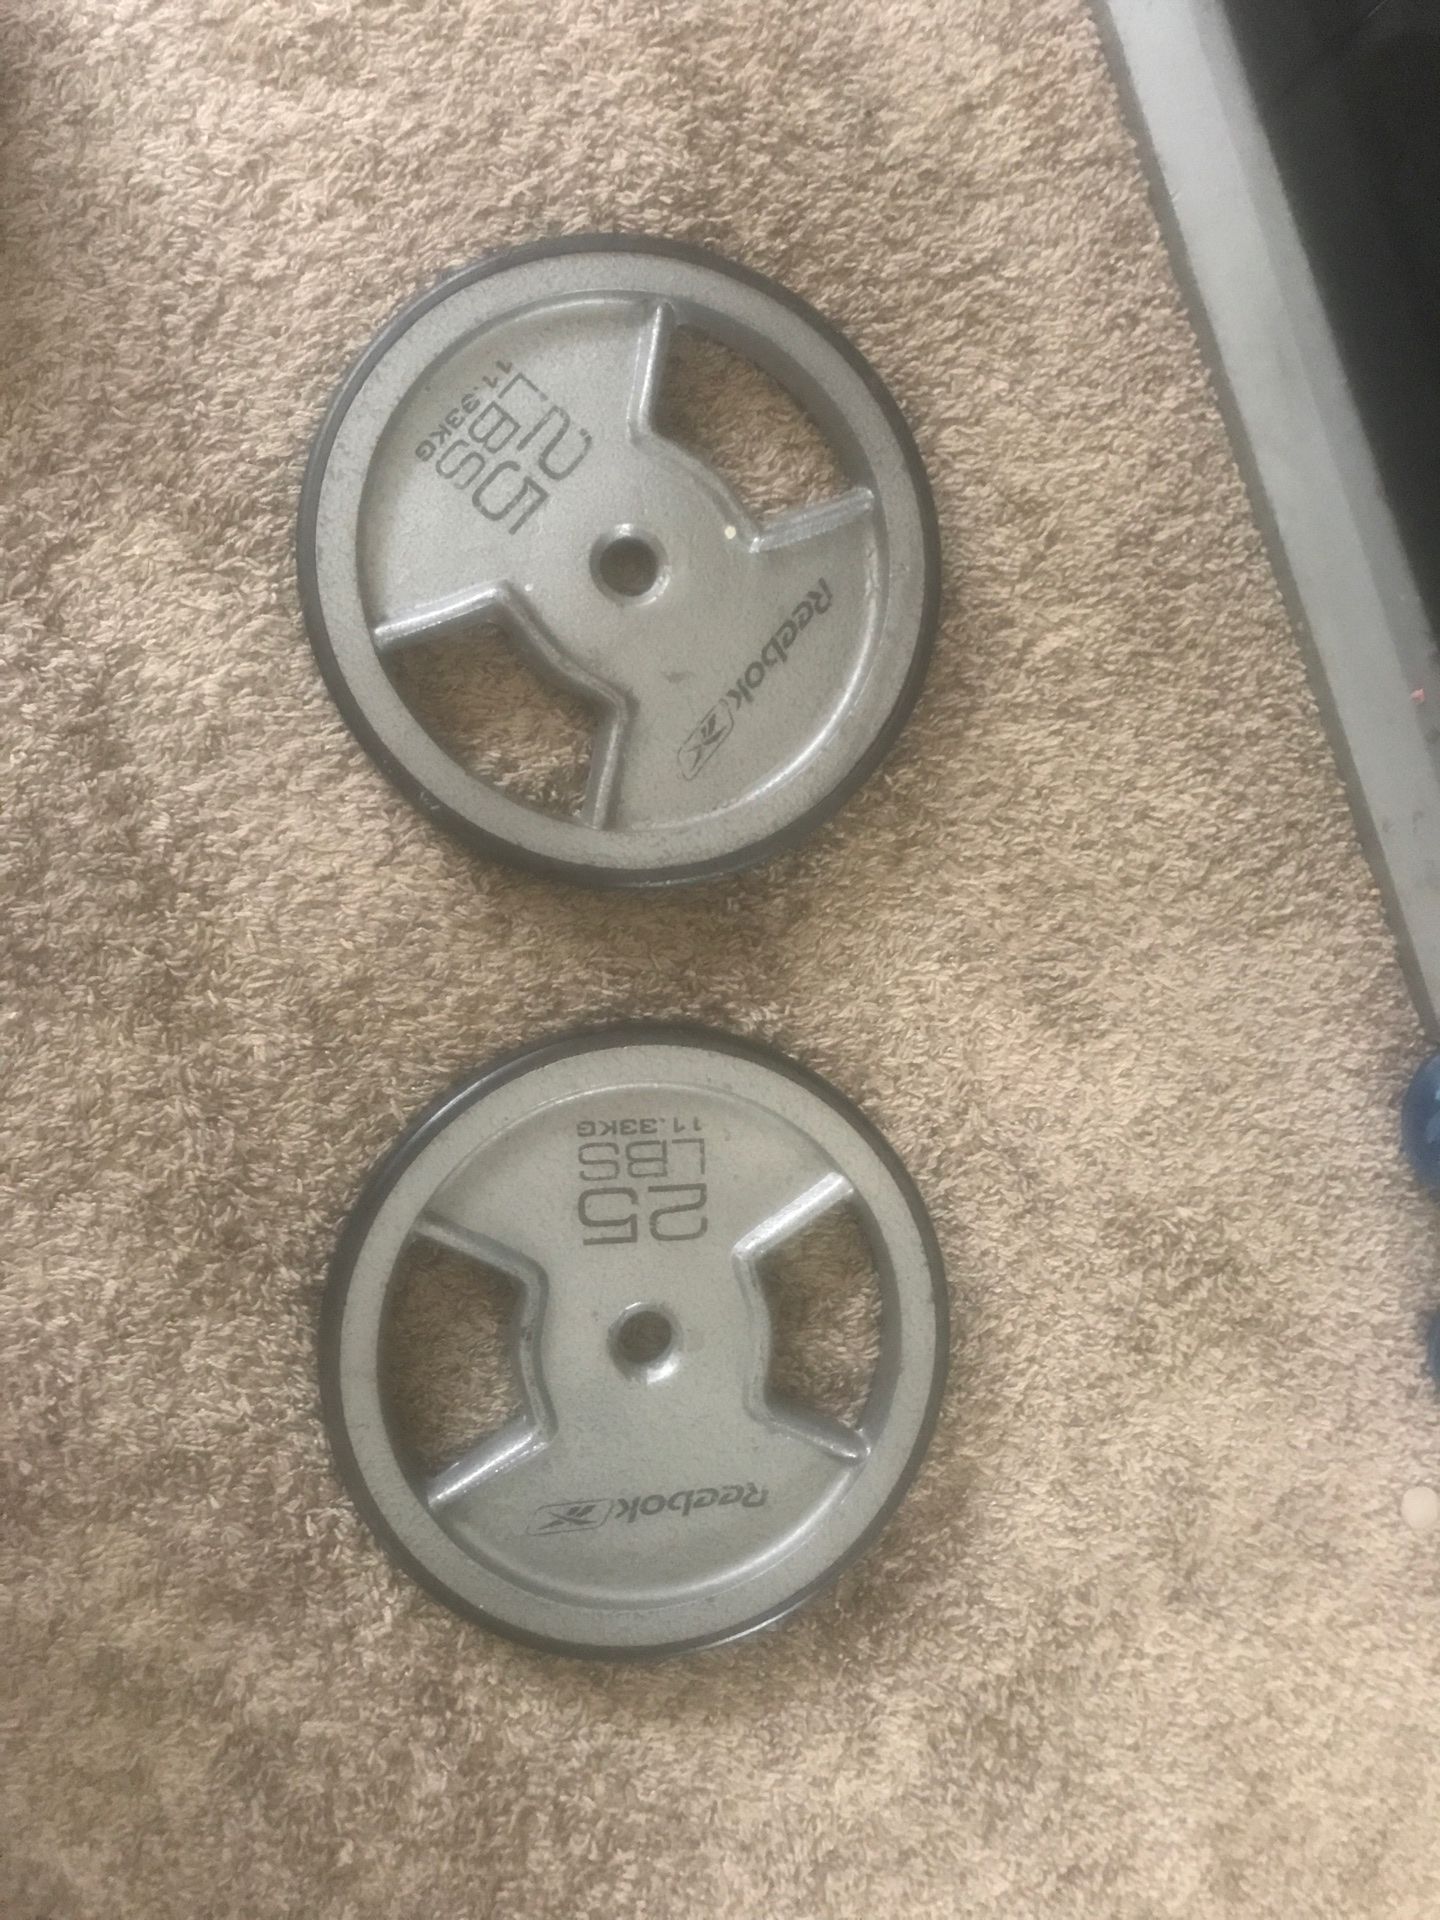 25lbs weights